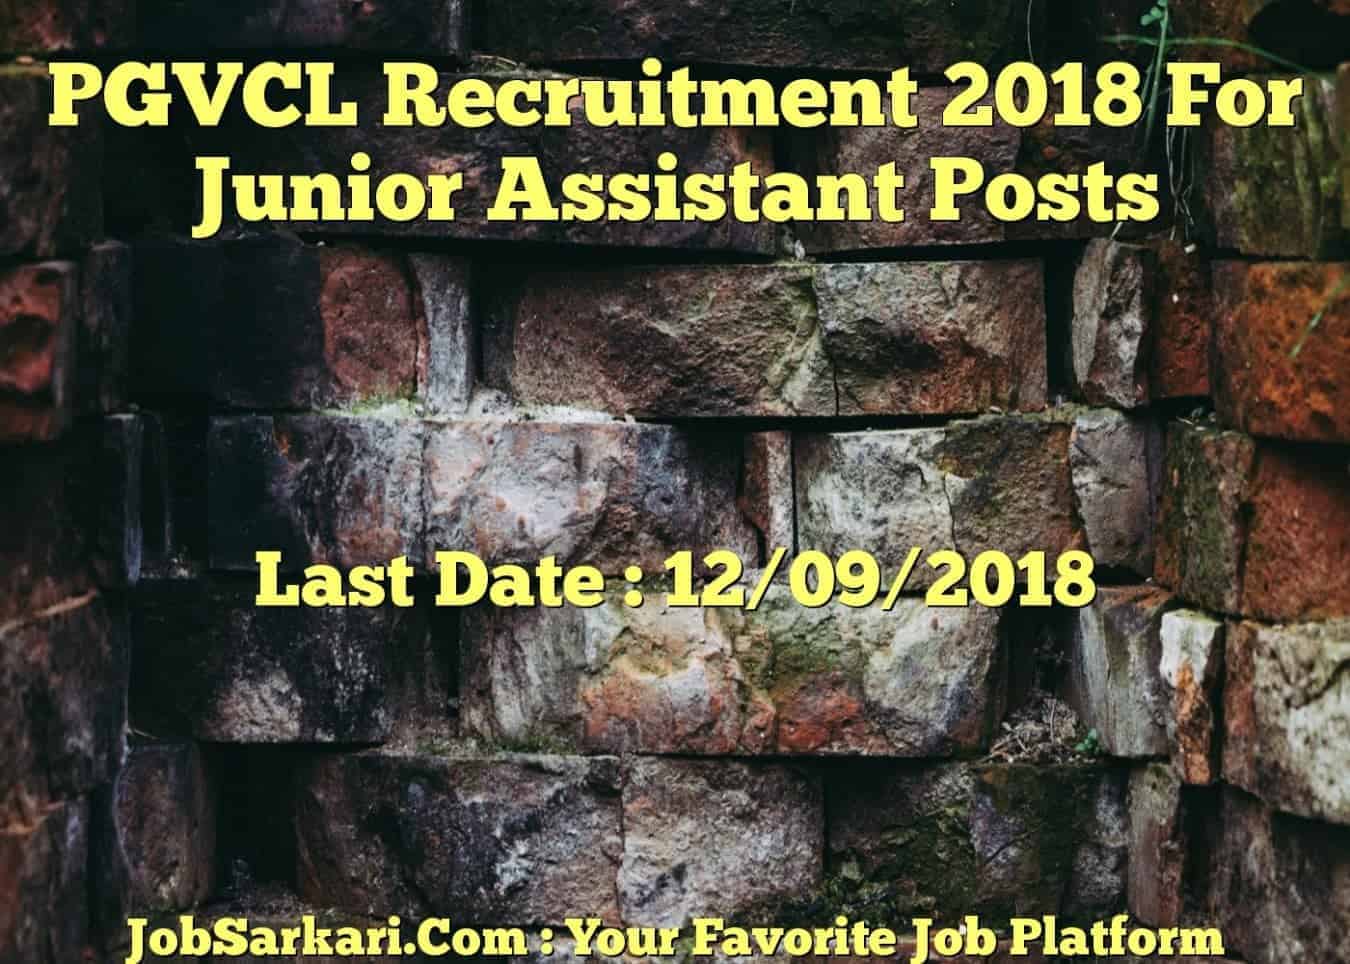 PGVCL Recruitment 2018 For Junior Assistant Posts